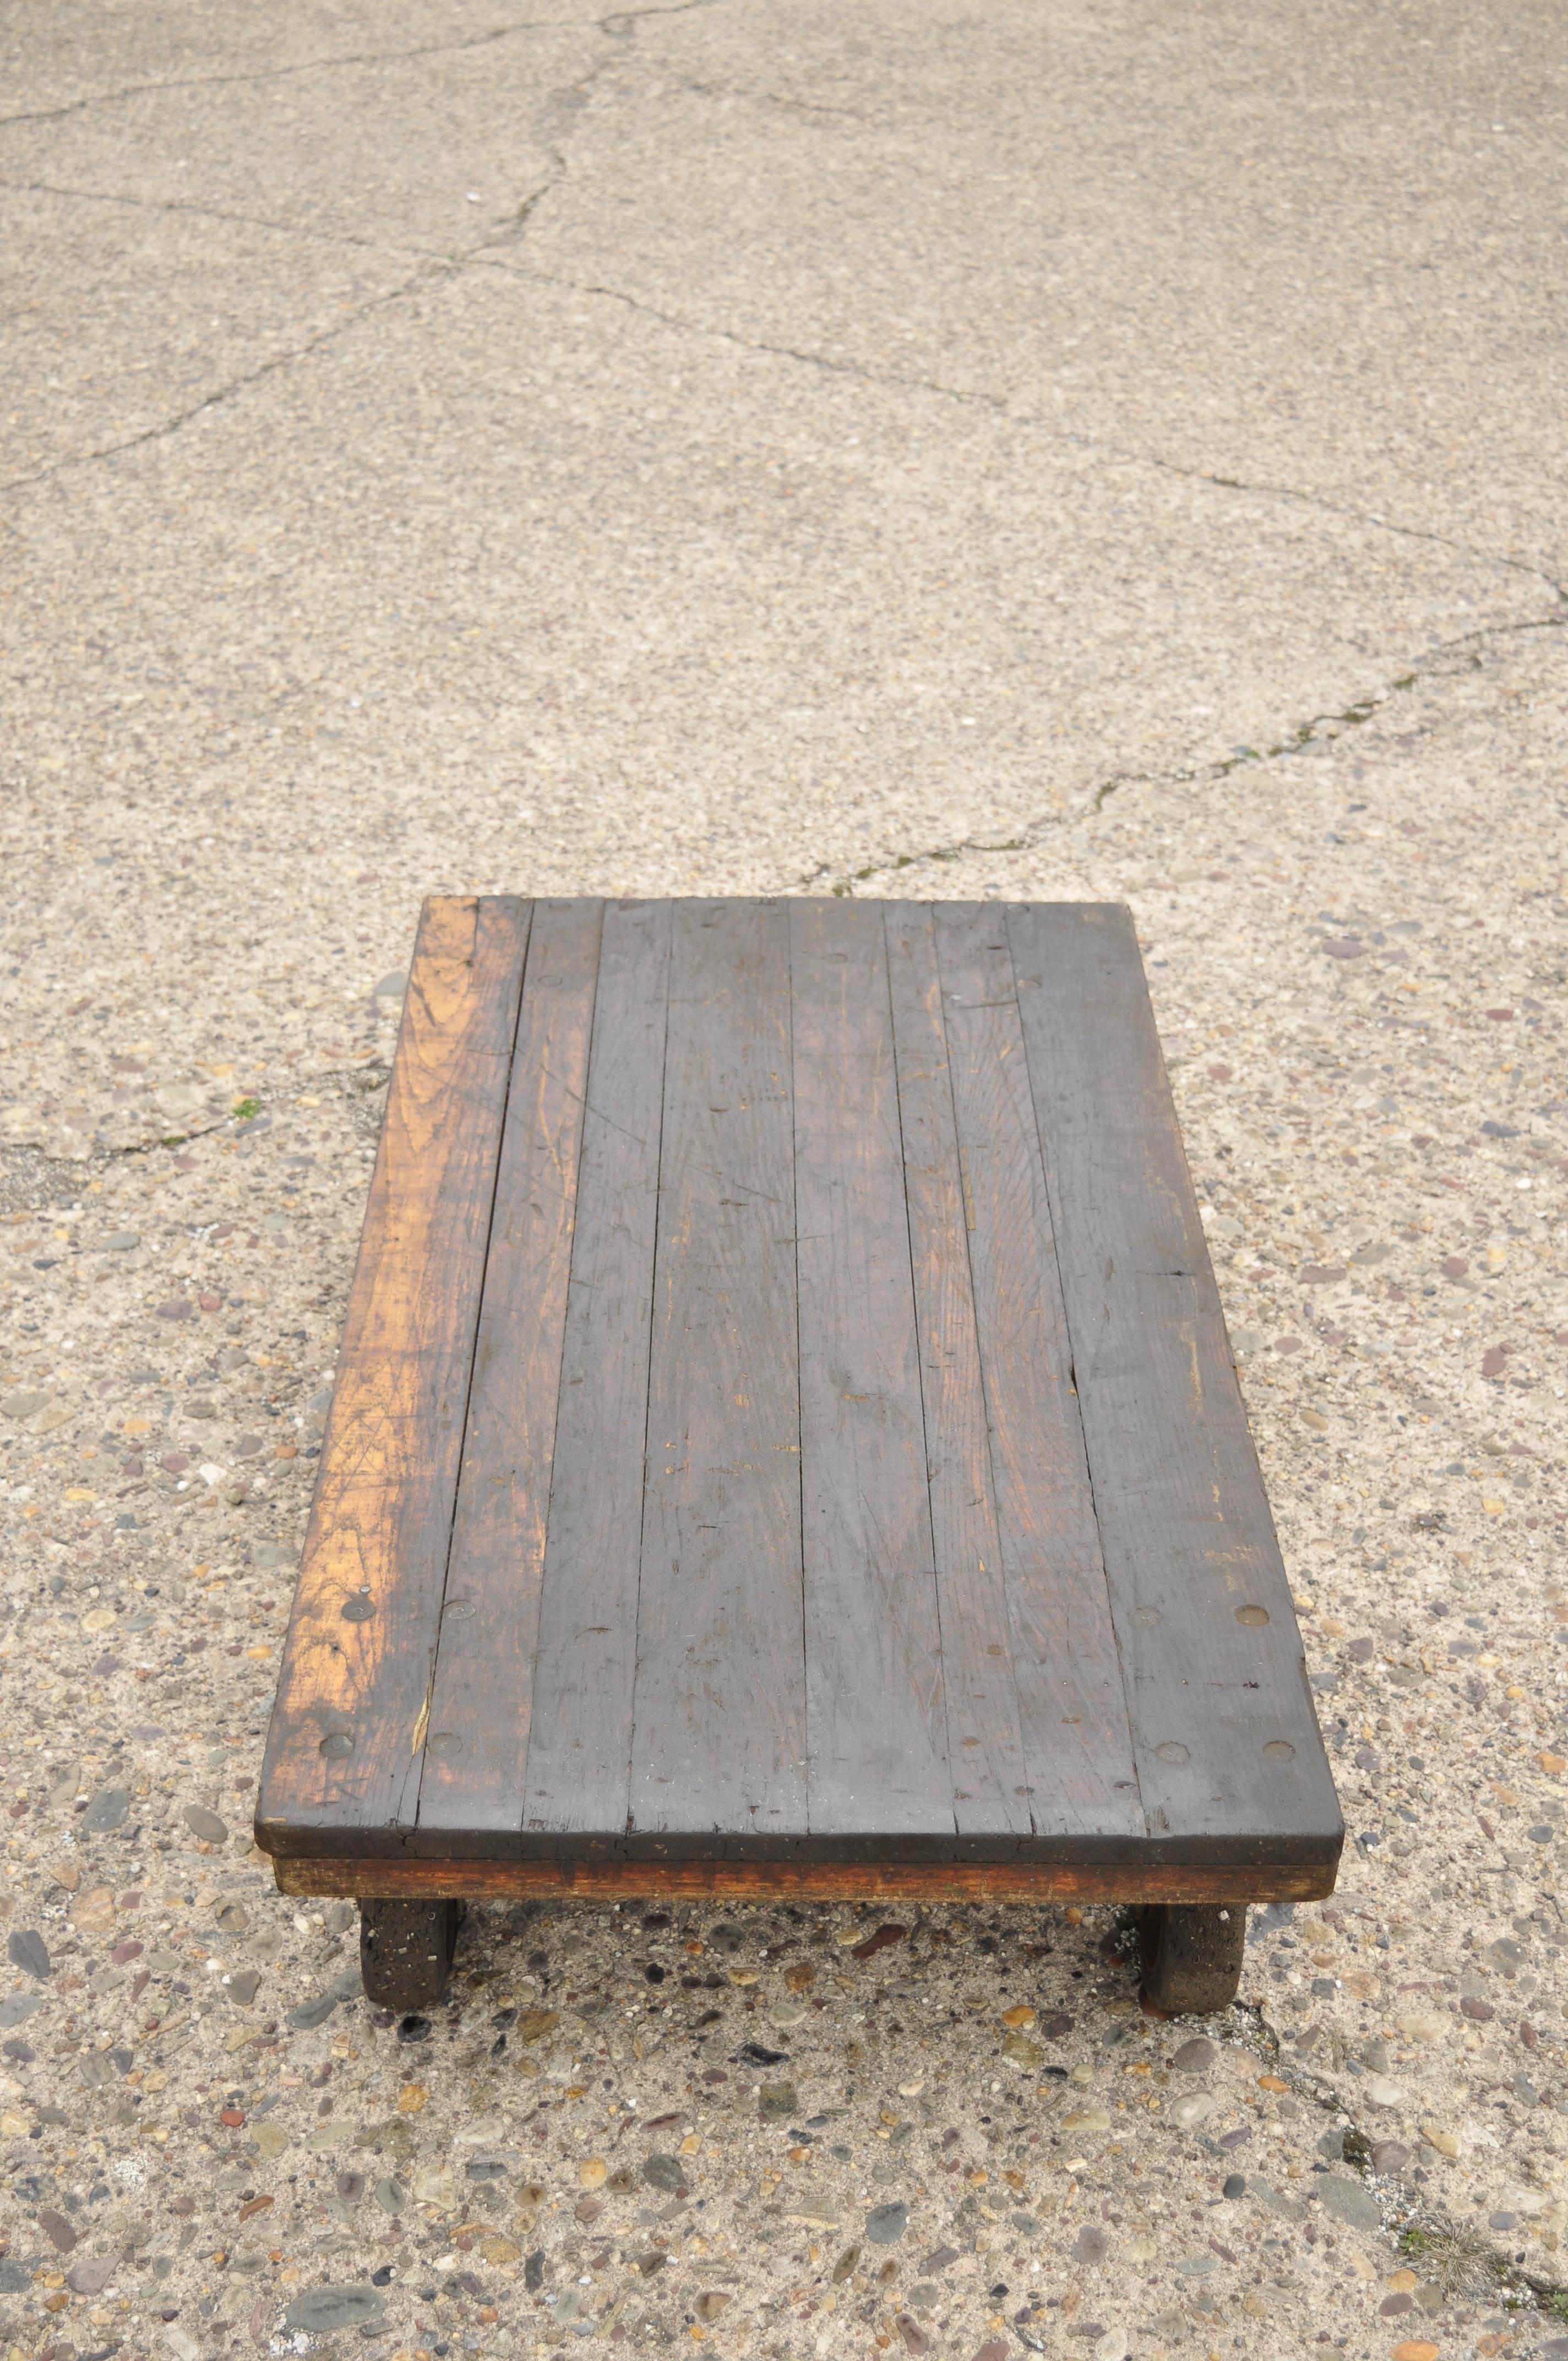 Vintage Fairbanks American Industrial Wood & Iron Factory Work Cart Coffee Table For Sale 4